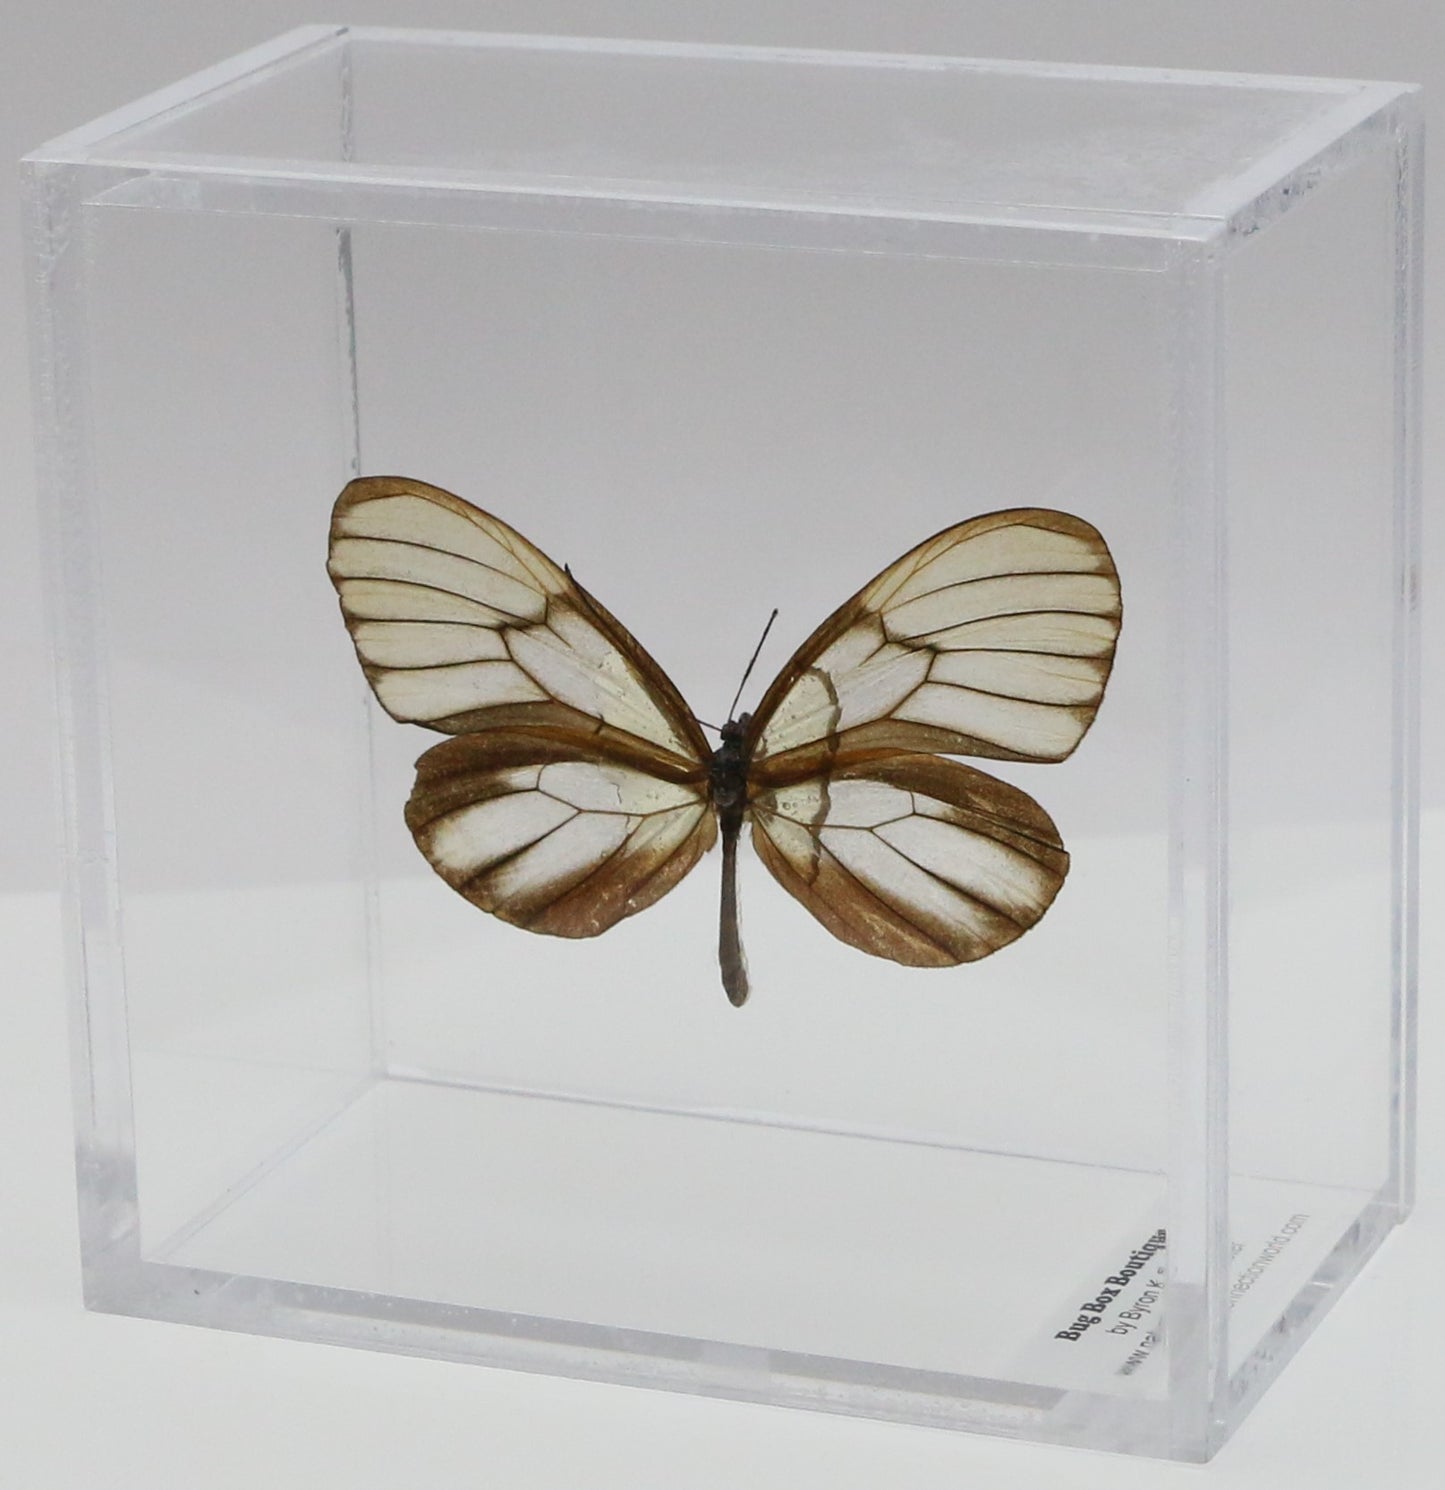 9040413 - Real Butterfly Acrylic Display Box - 4"X4" - Clearwing Butterfly (Godyris duillia)